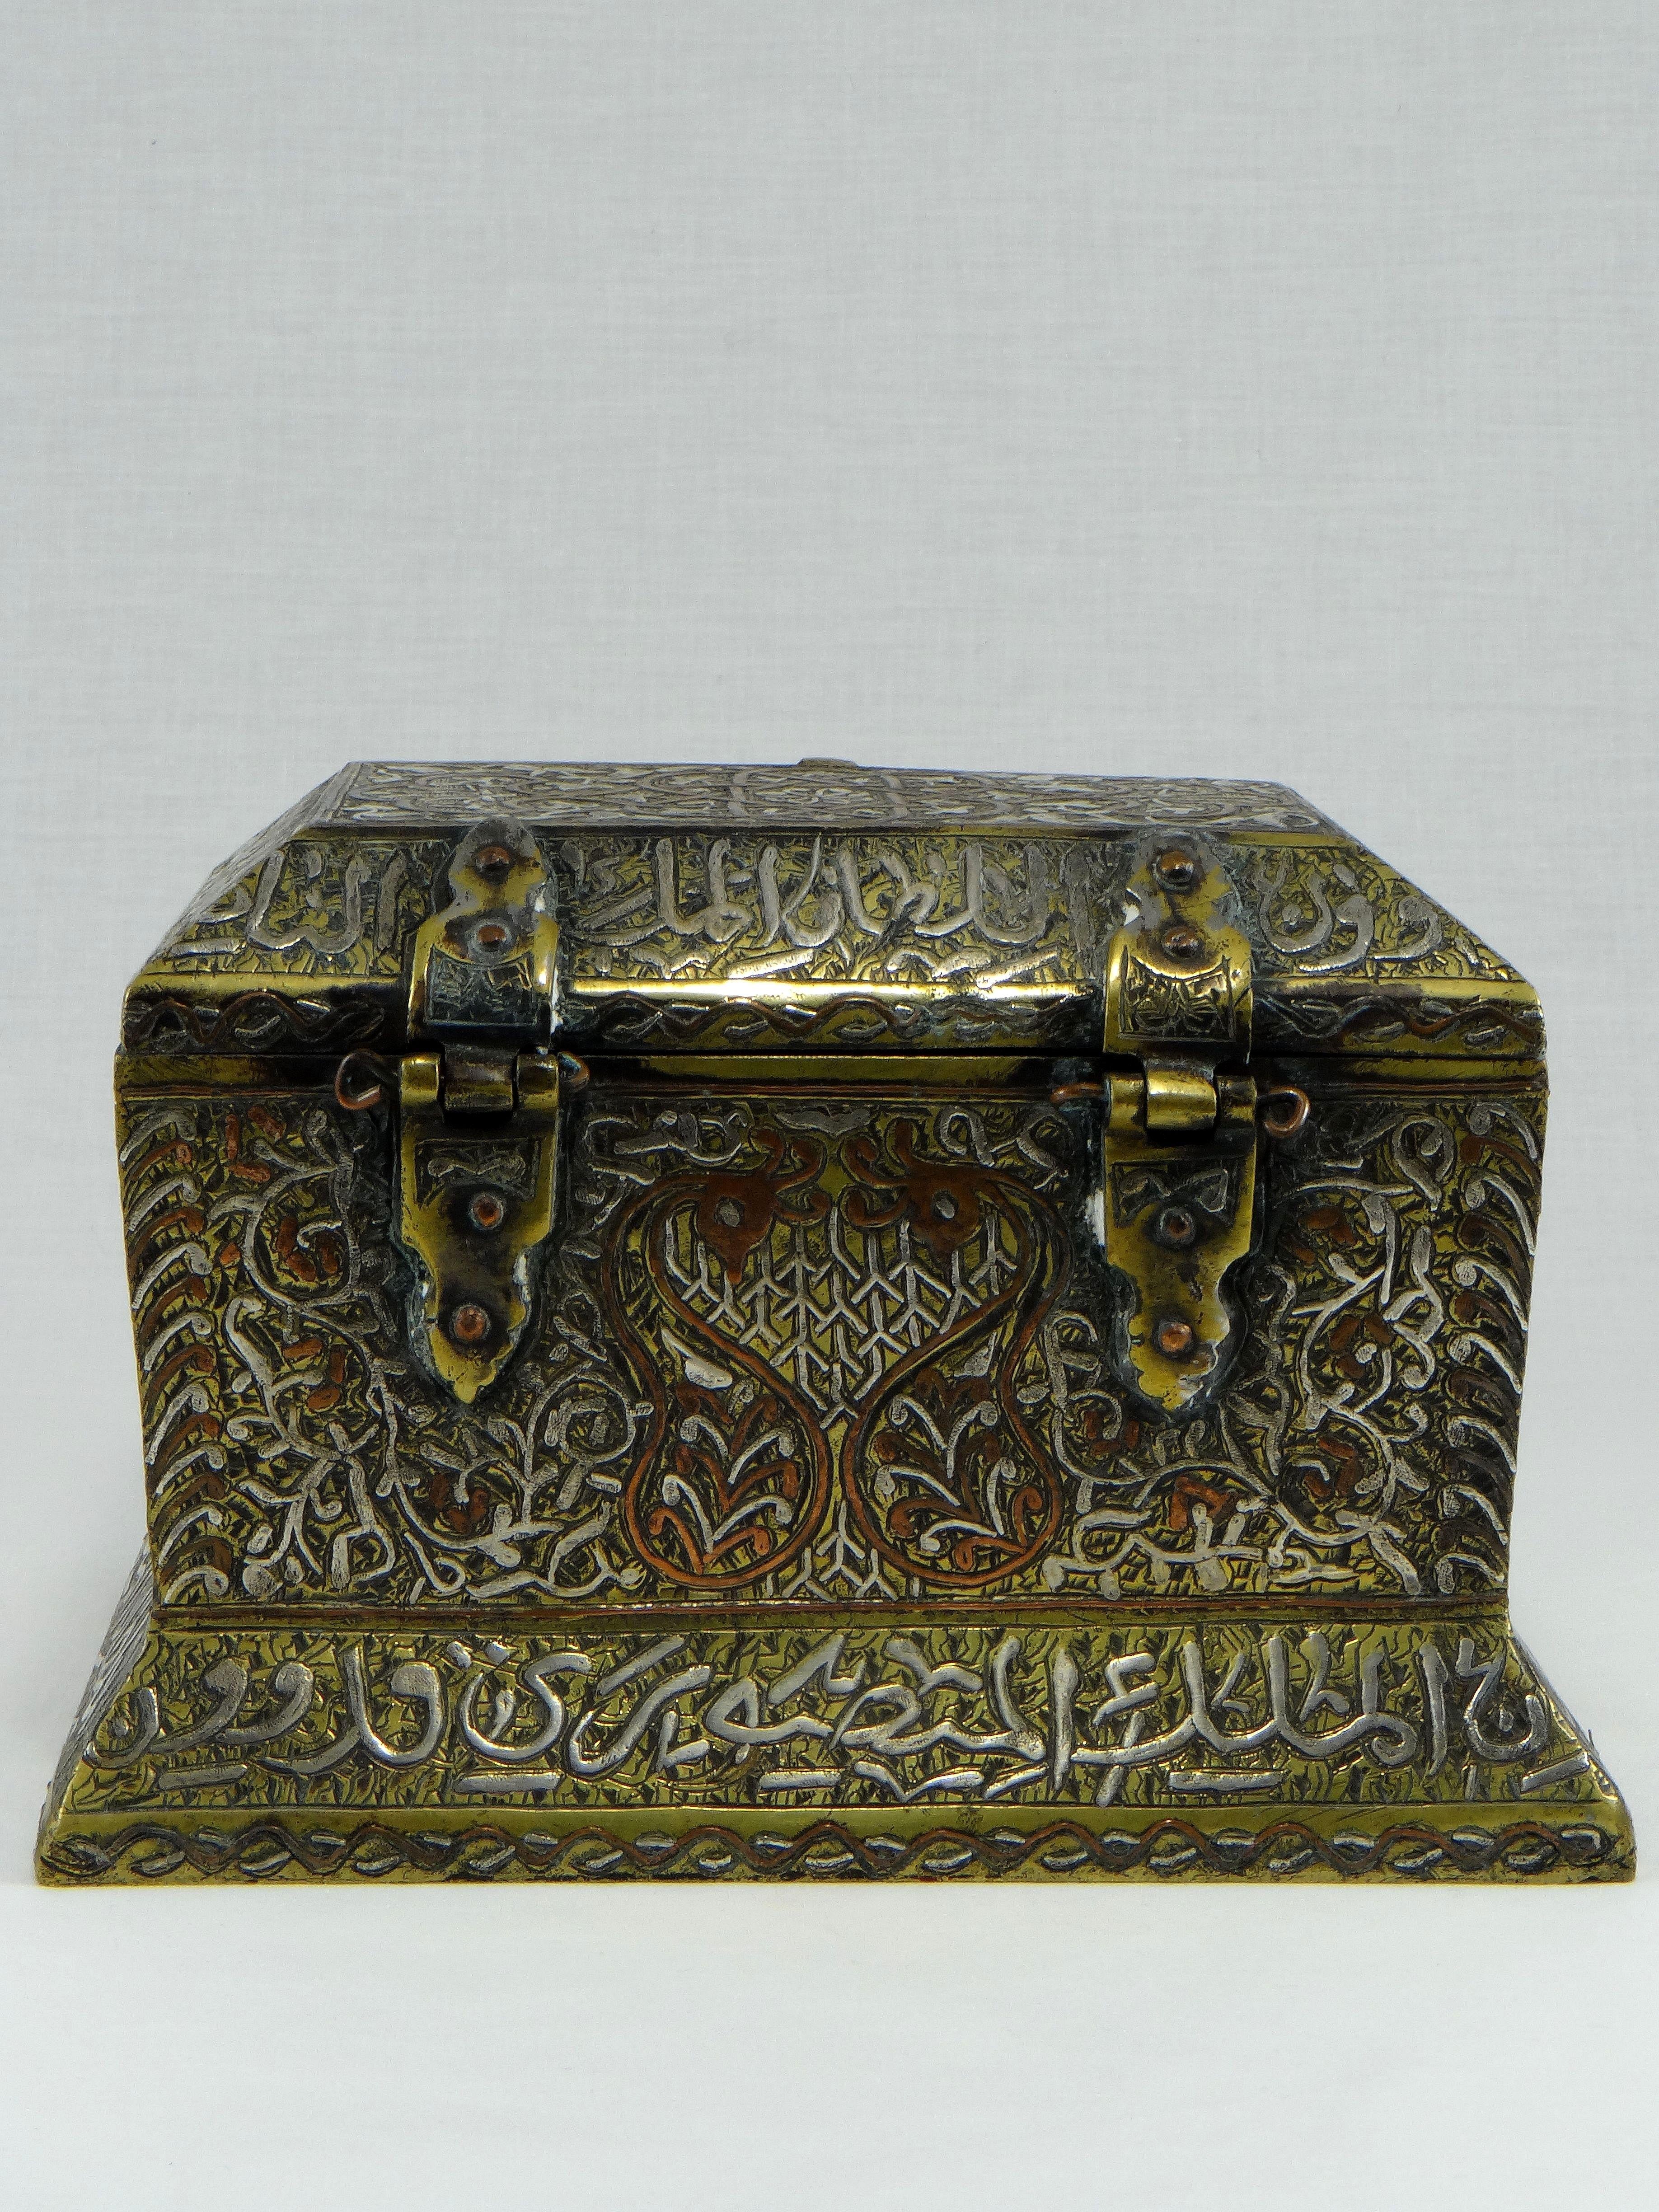 Syrian Bronze Box Inlaid with Silver and Copper, Syria, 1900s-1920s